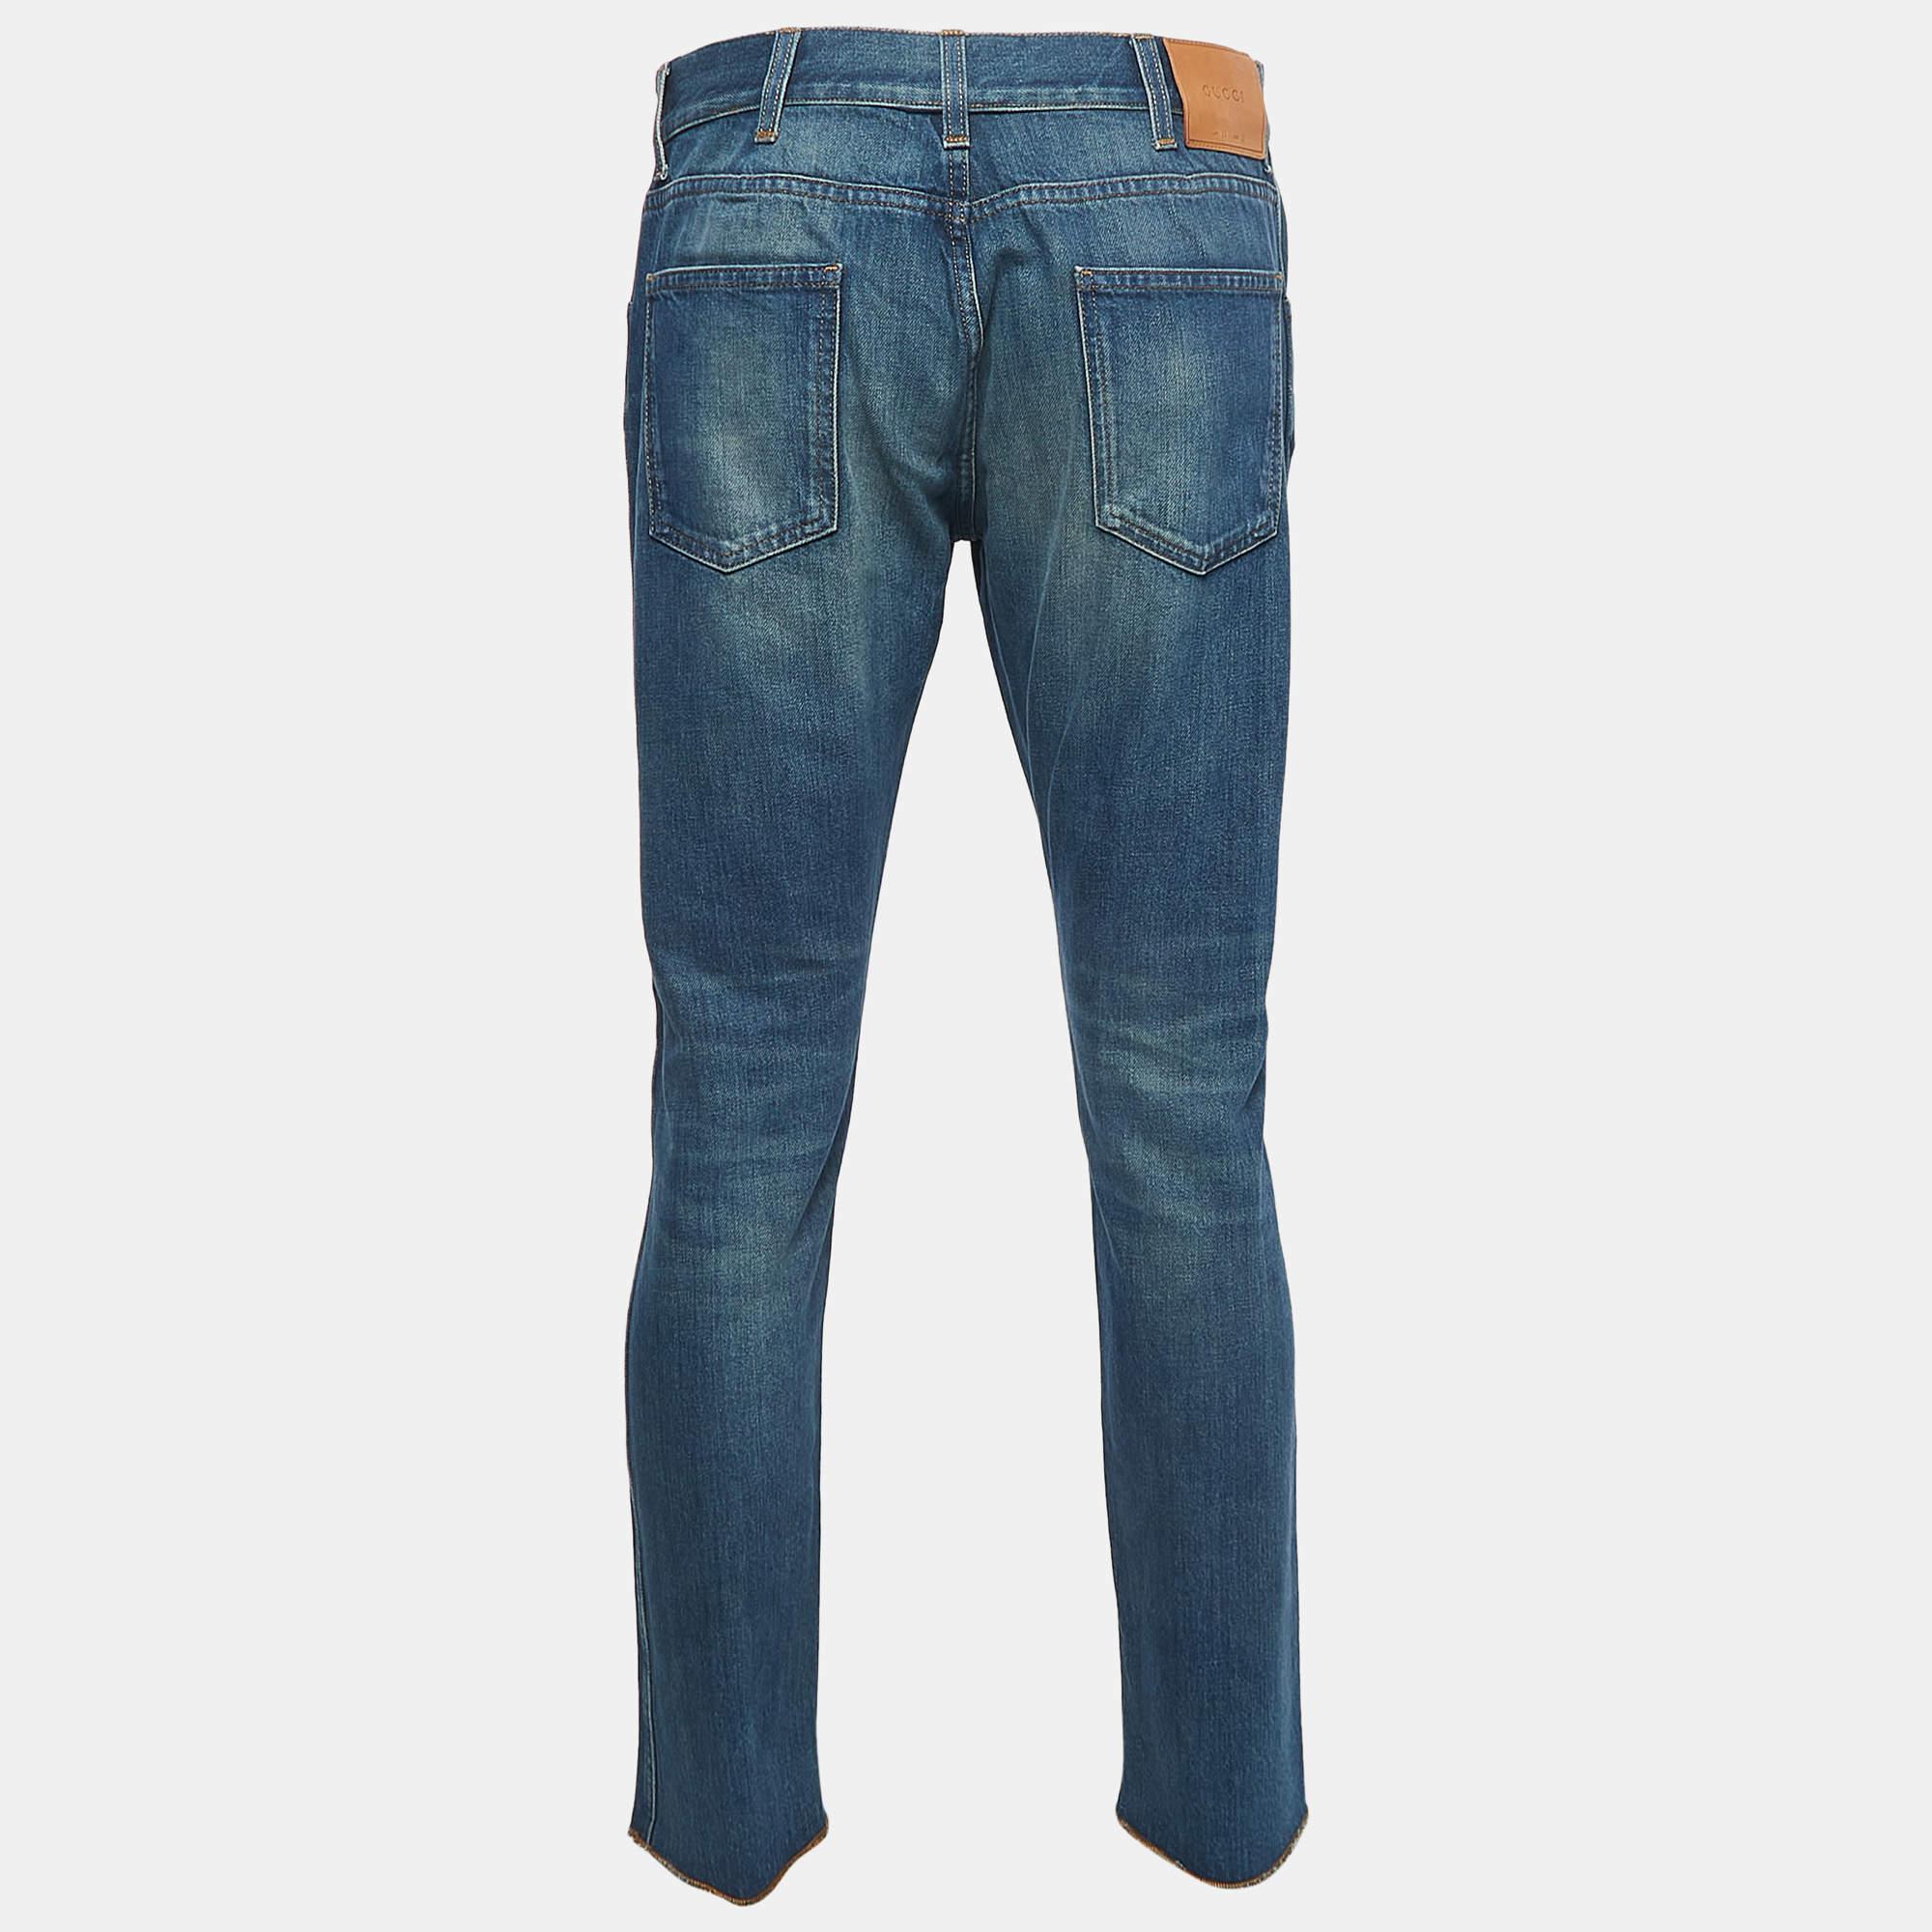 A good pair of jeans always makes the closet complete. This pair of jeans from Gucci is tailored with such skill and panache that it will be your favorite in no time. It is tailored using quality fabric and gives you a comfortably stylish fit.

